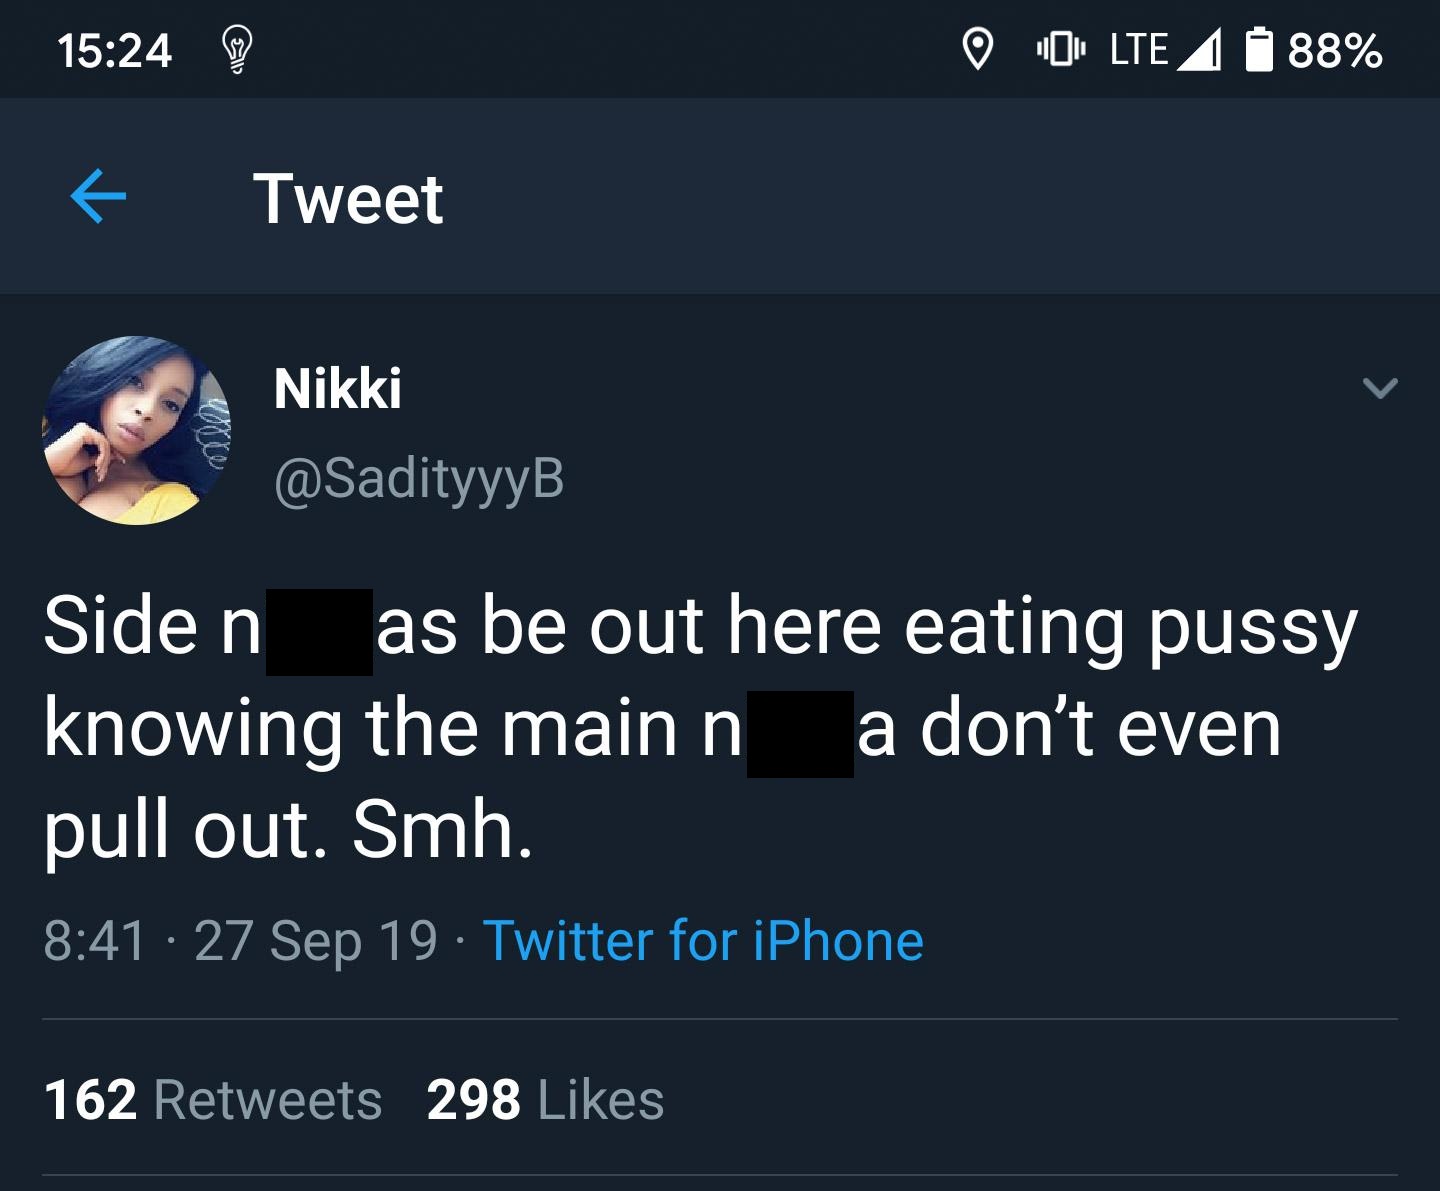 black twitter - Side n as be out here eating pussy knowing the main n a don't even pull out. Smh. 27 Sep 19 Twitter for iPhone 162 298